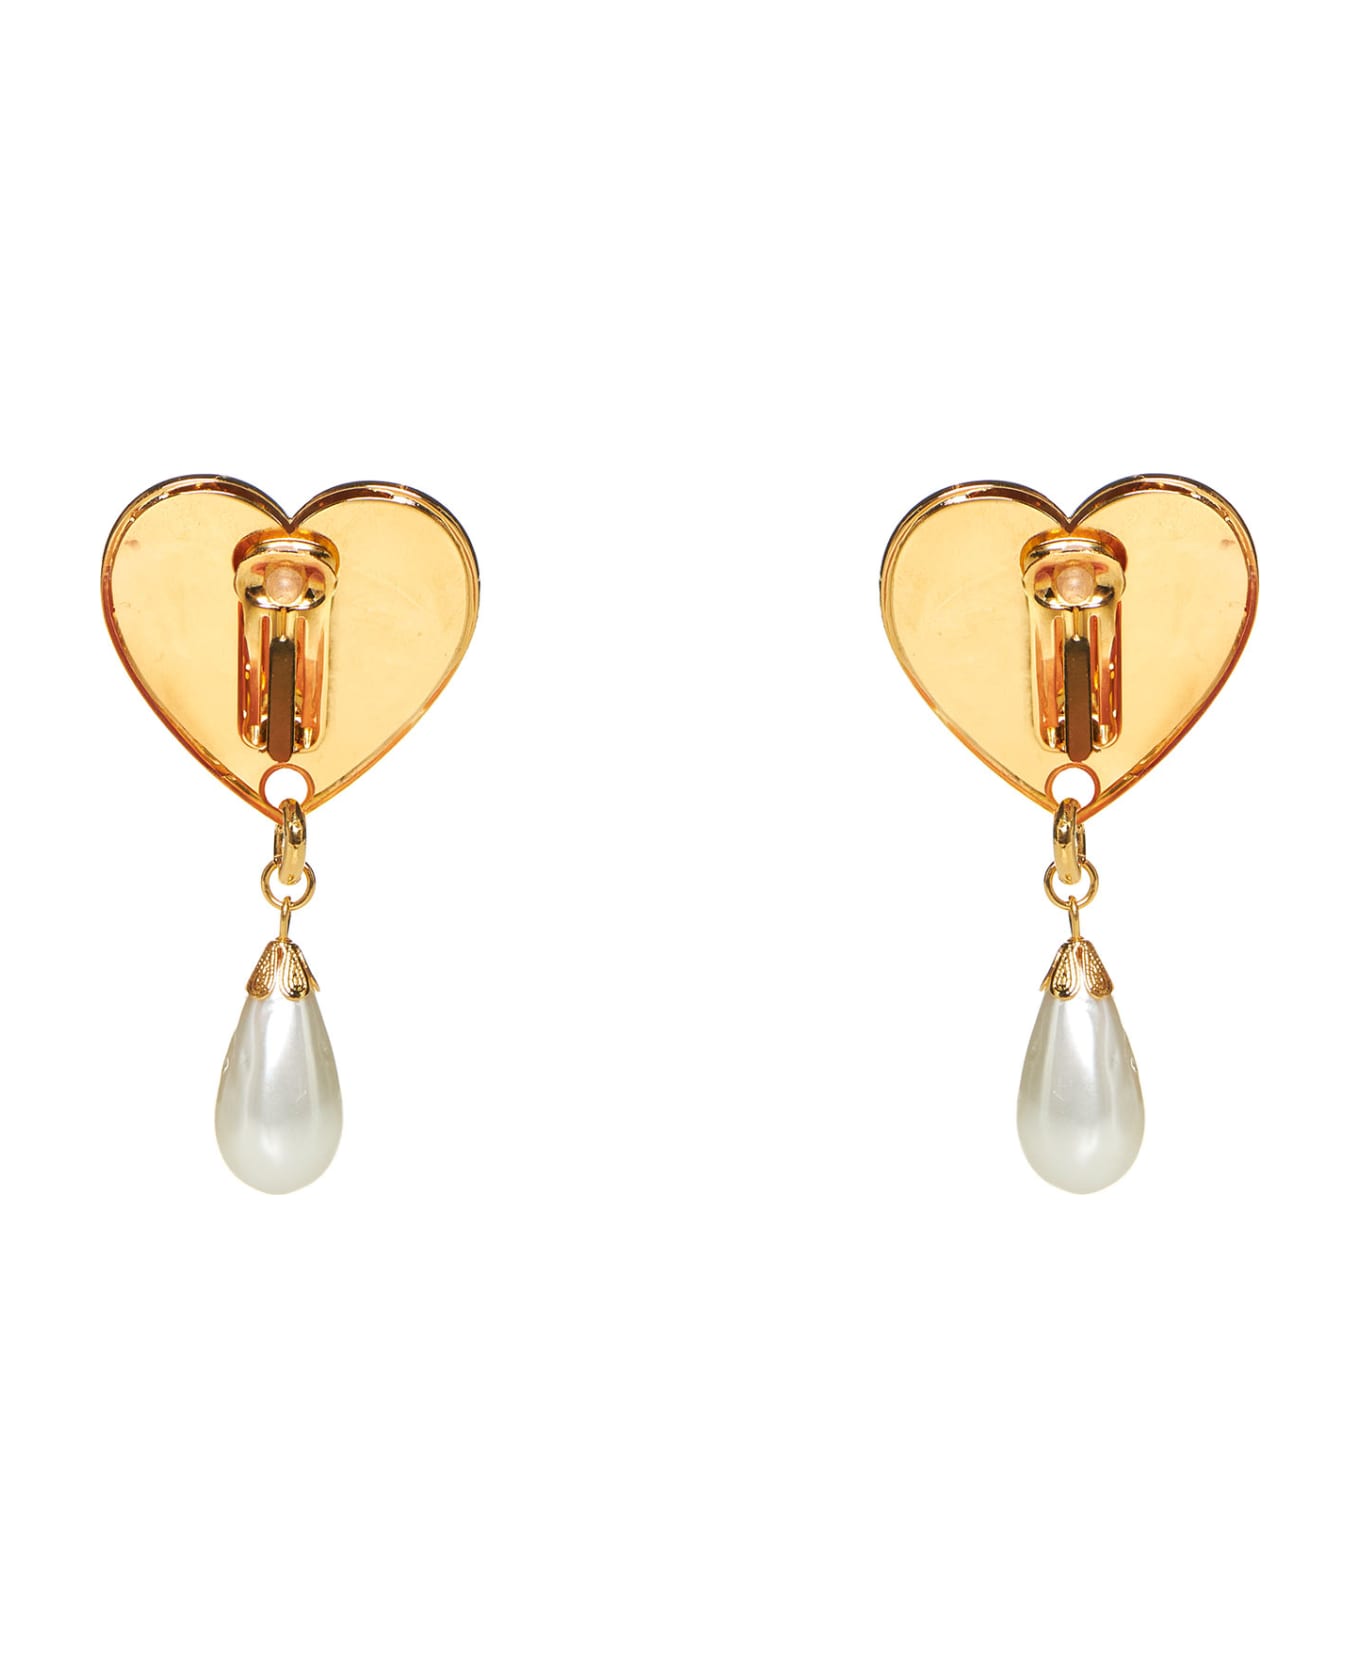 Alessandra Rich Earrings - Cry gold